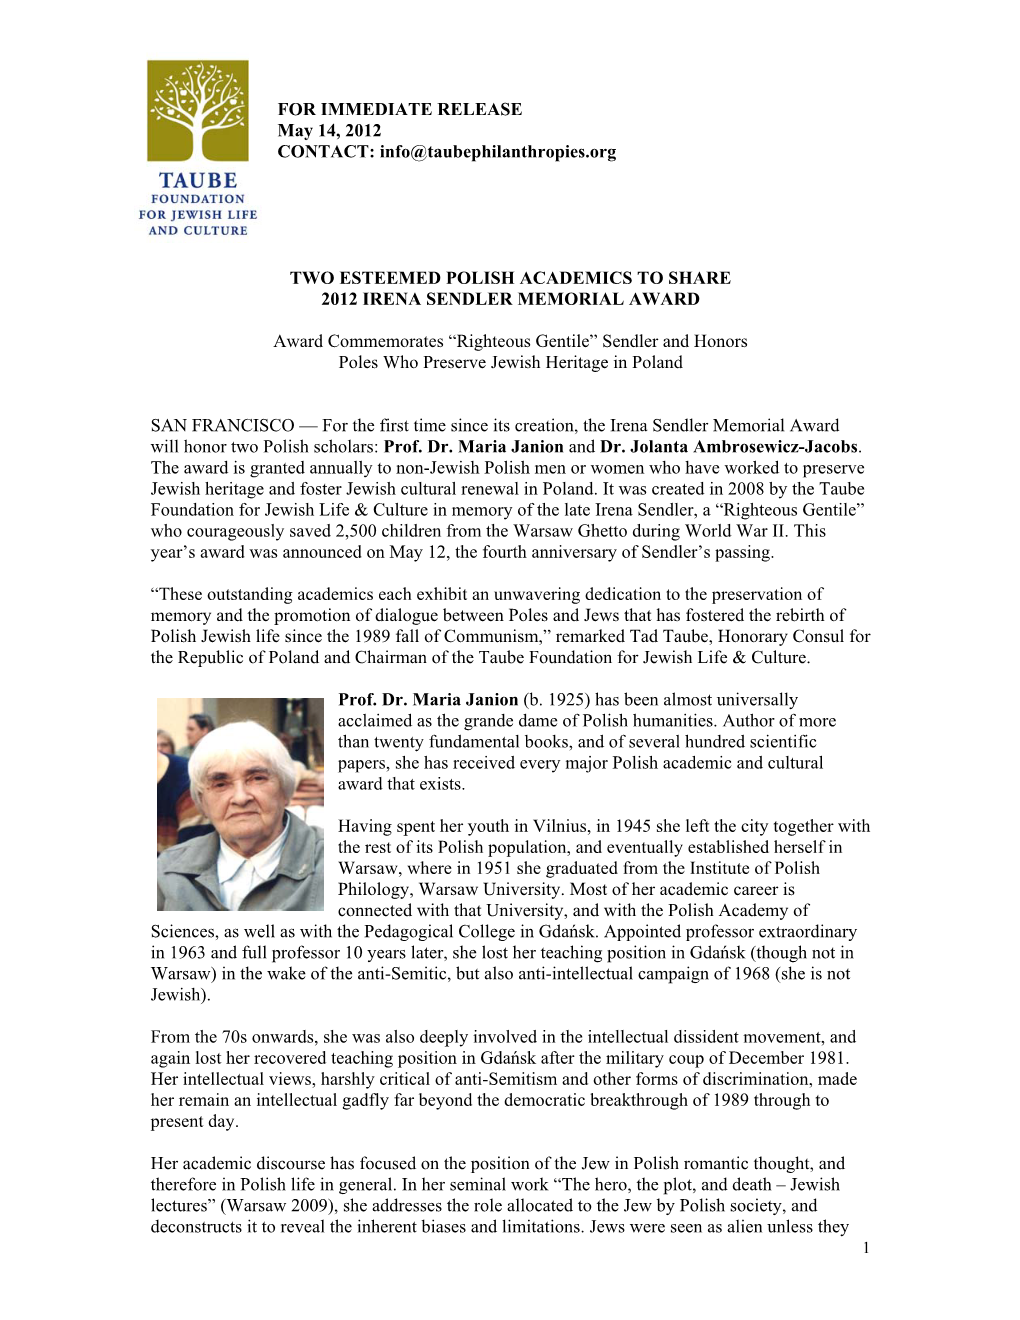 FOR IMMEDIATE RELEASE May 14, 2012 CONTACT: Info@Taubephilanthropies.Org TWO ESTEEMED POLISH ACADEMICS to SHARE 2012 IRENA SEND